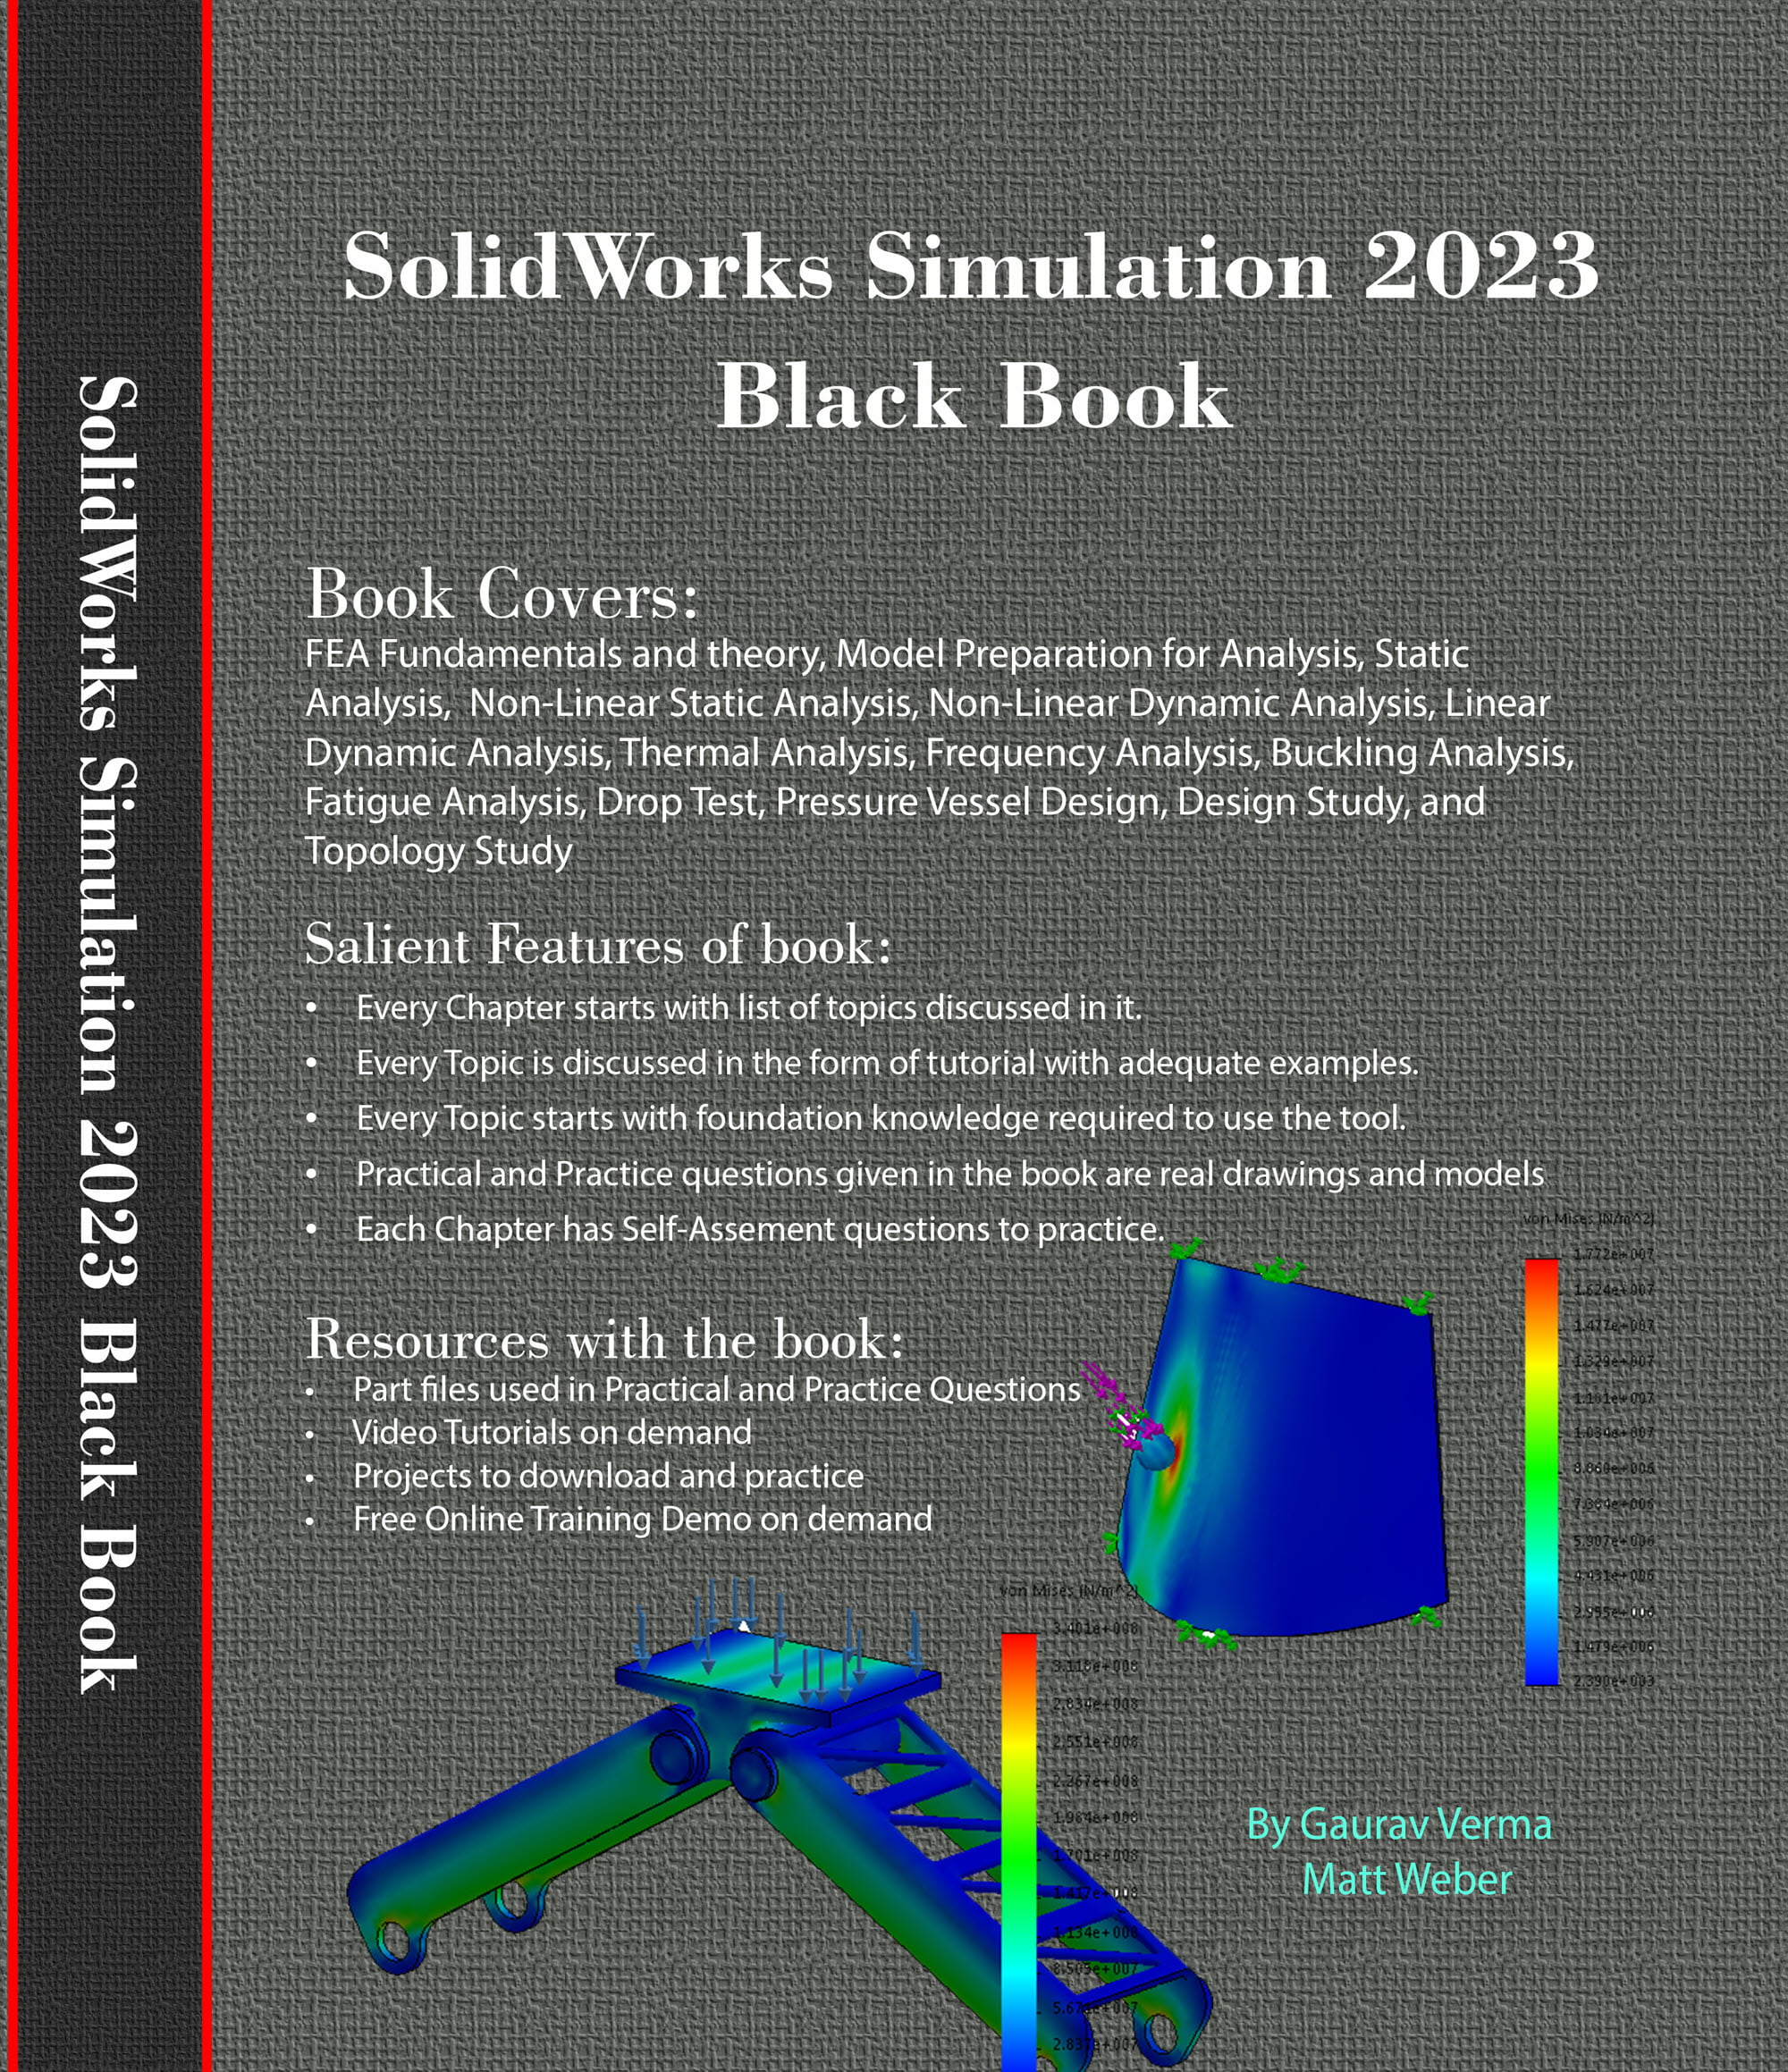 SolidWorks Simulation 2023 Book Cover